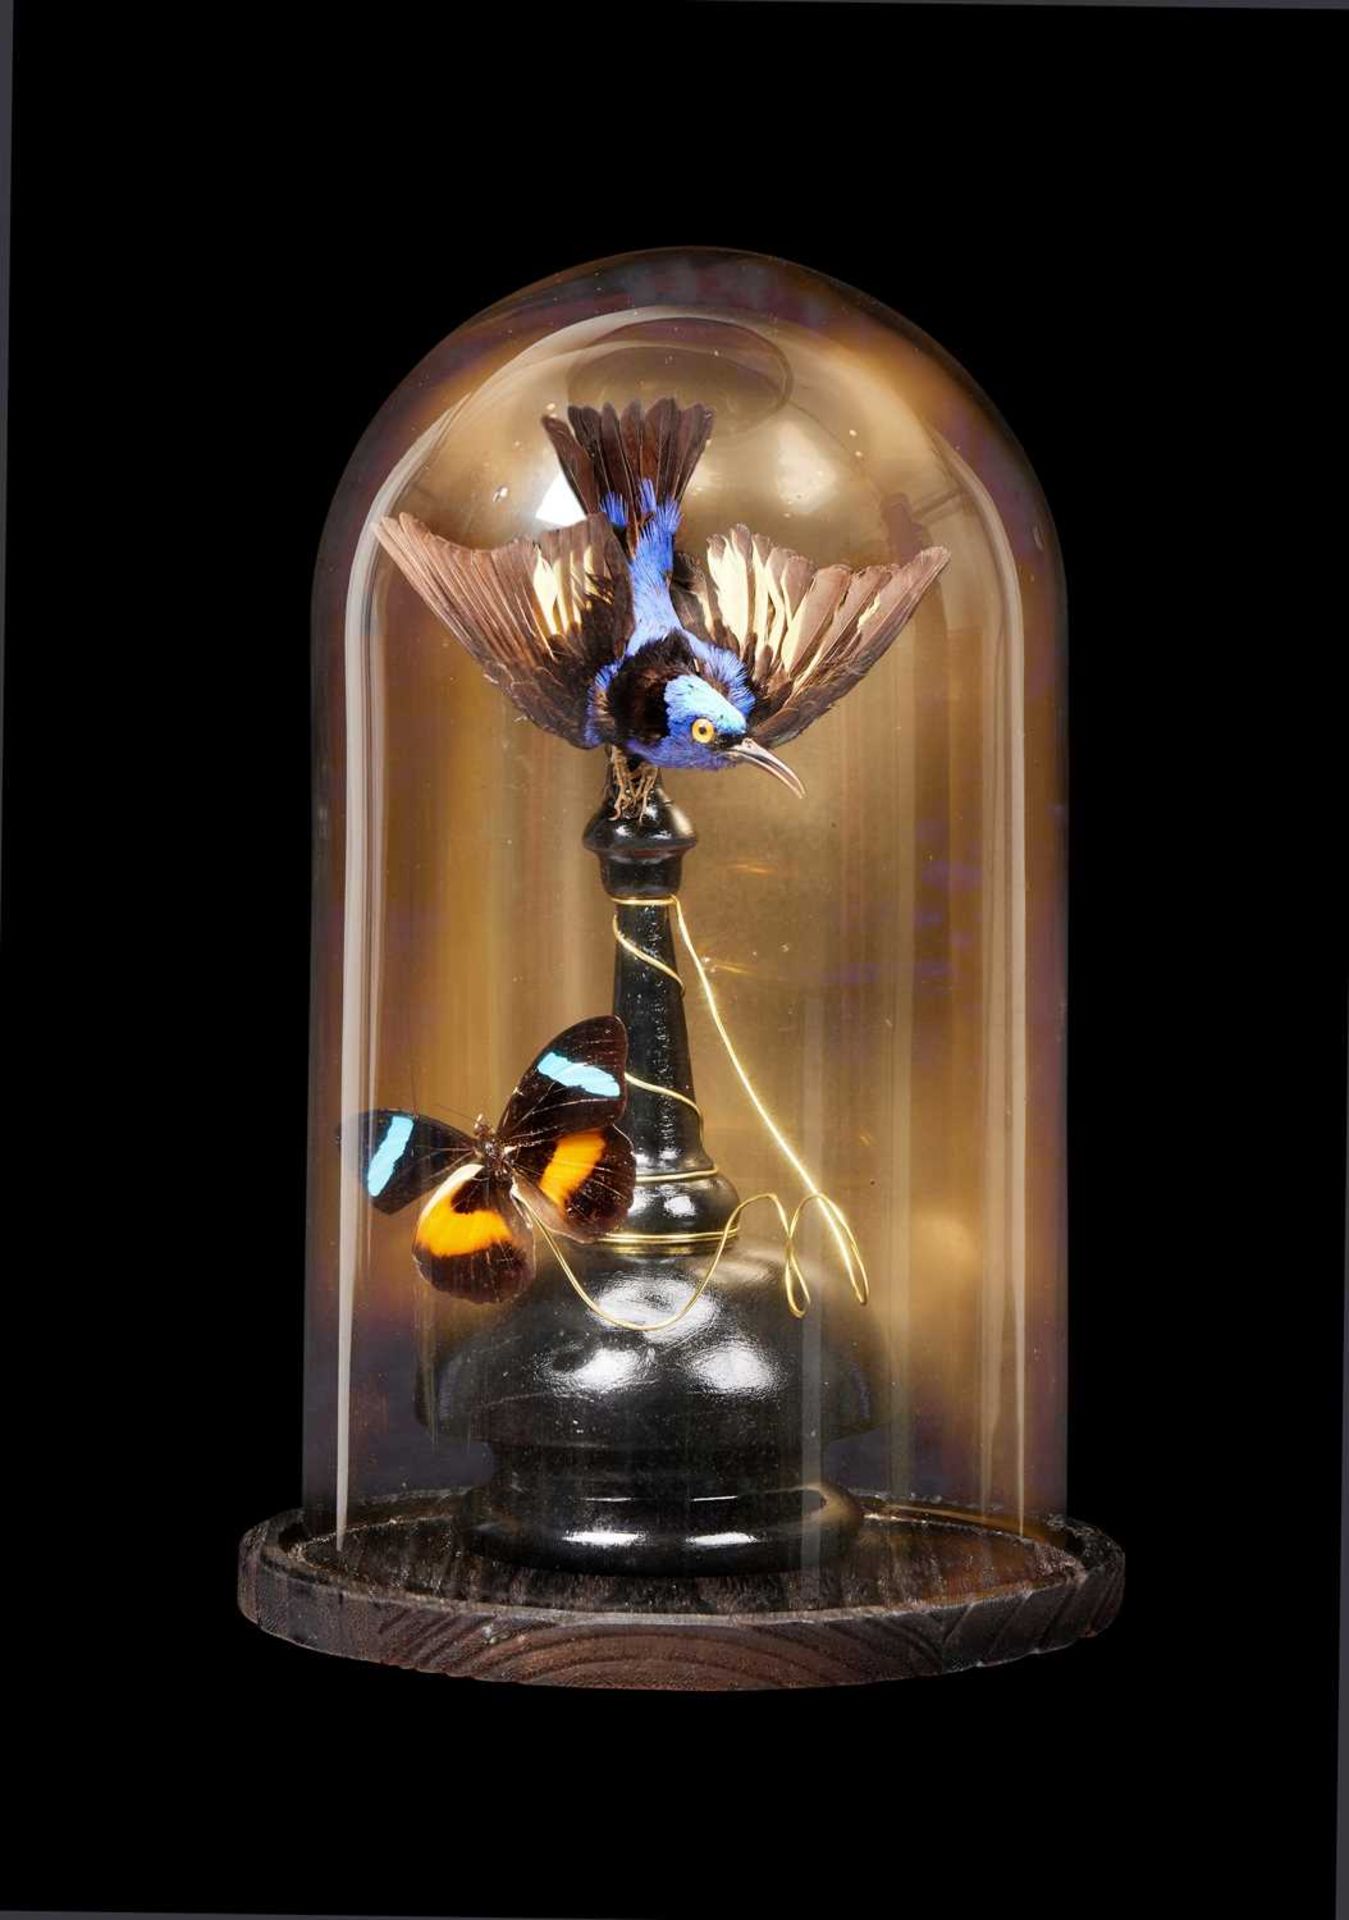 A TAXIDERMY SUNBIRD AND BUTTERFLY UNDER A GLASS DOME